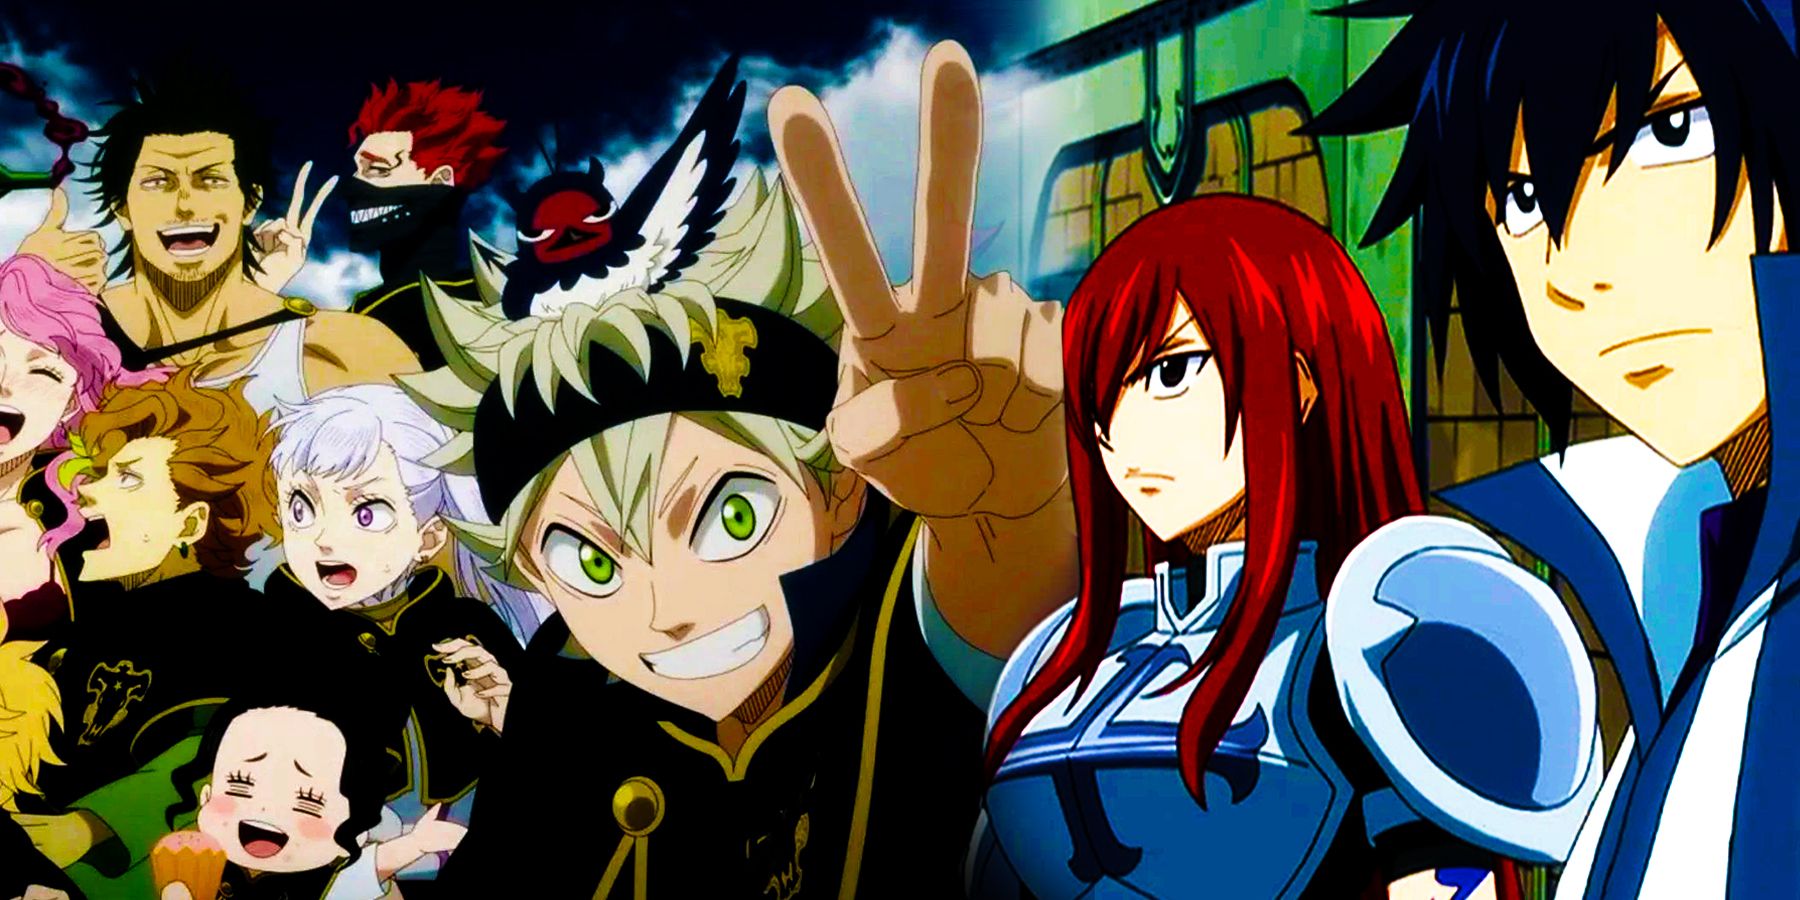 Black Clover's Black Bull Magic Knight Squad Alongside Fairy Tail's Erza Scarlet and Gray Fullbuster